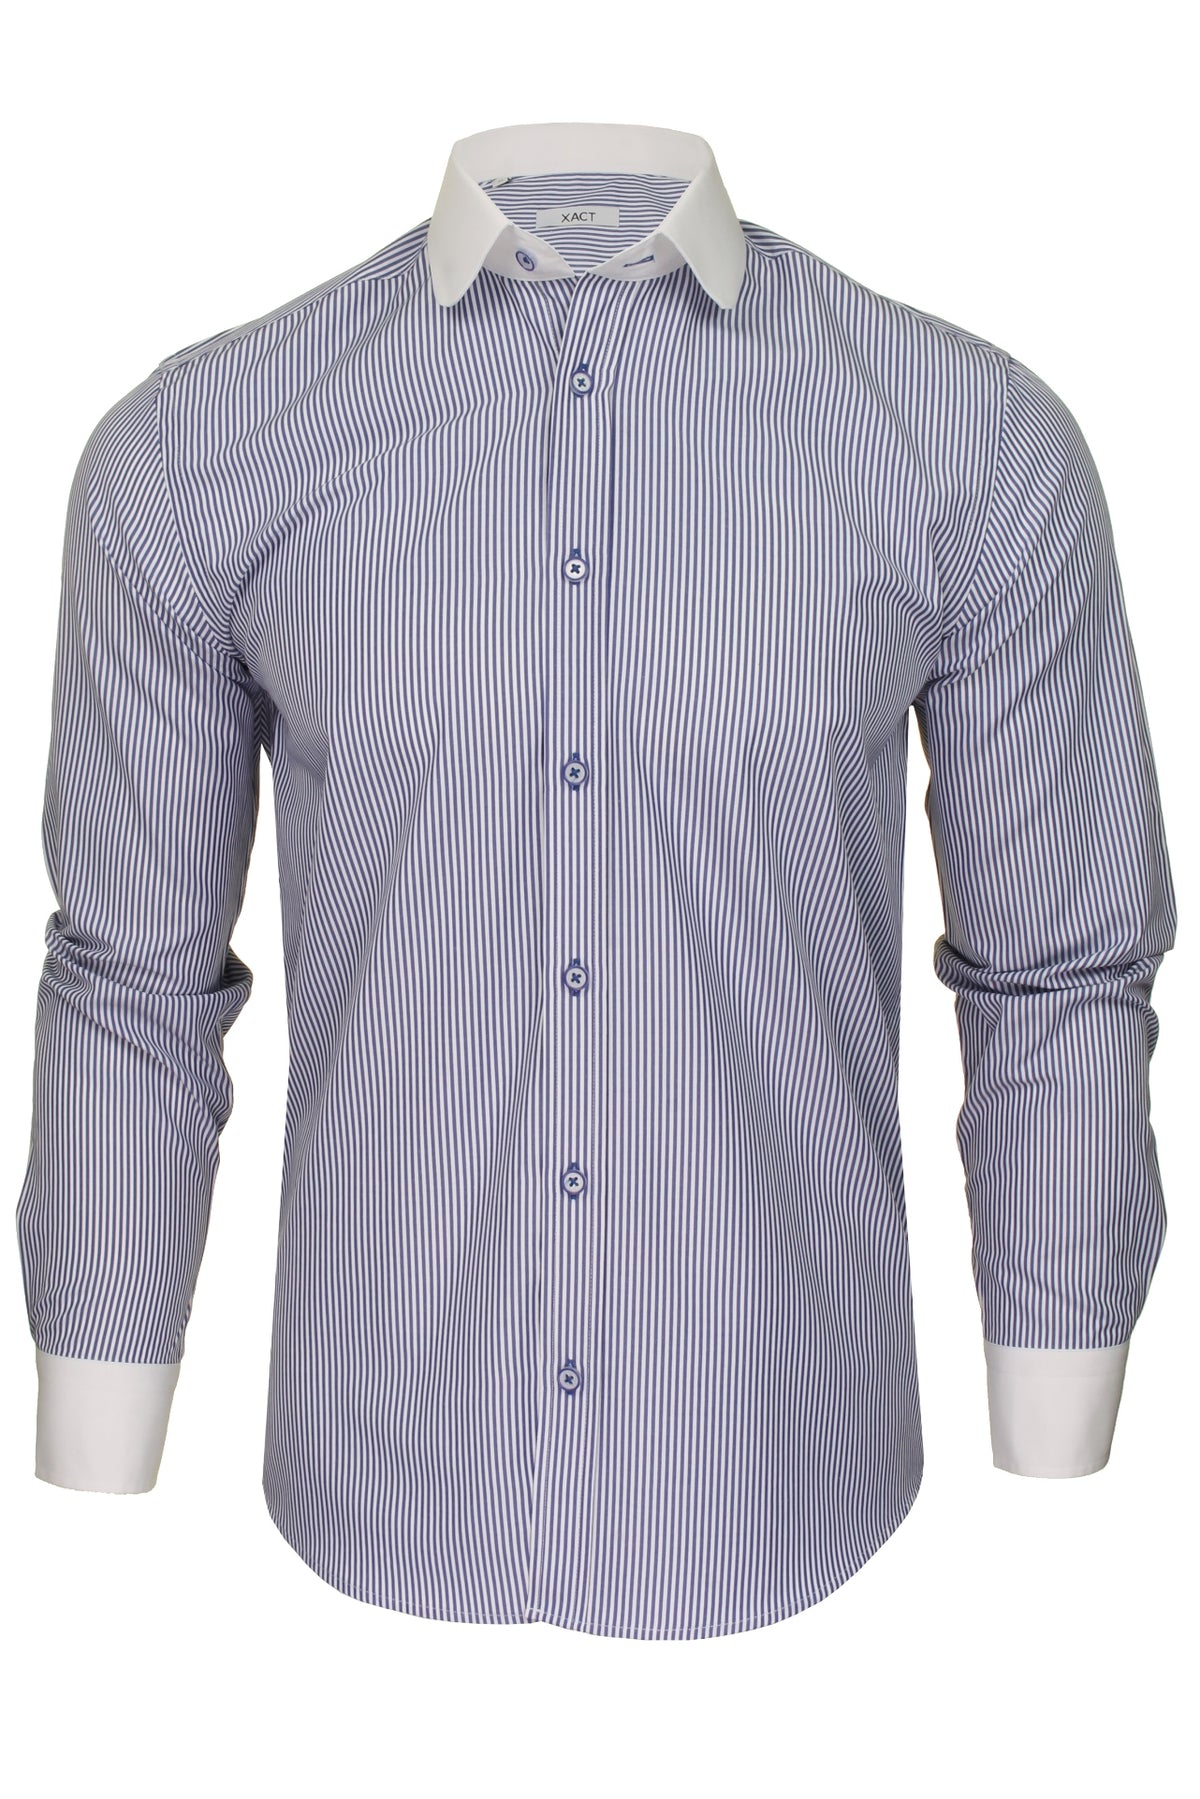 Xact Men's Long-Sleeved Striped Shirt with White Penny/Club Collar and White Cuffs, 01, Xsh1092, White Collar - Blue Stripe